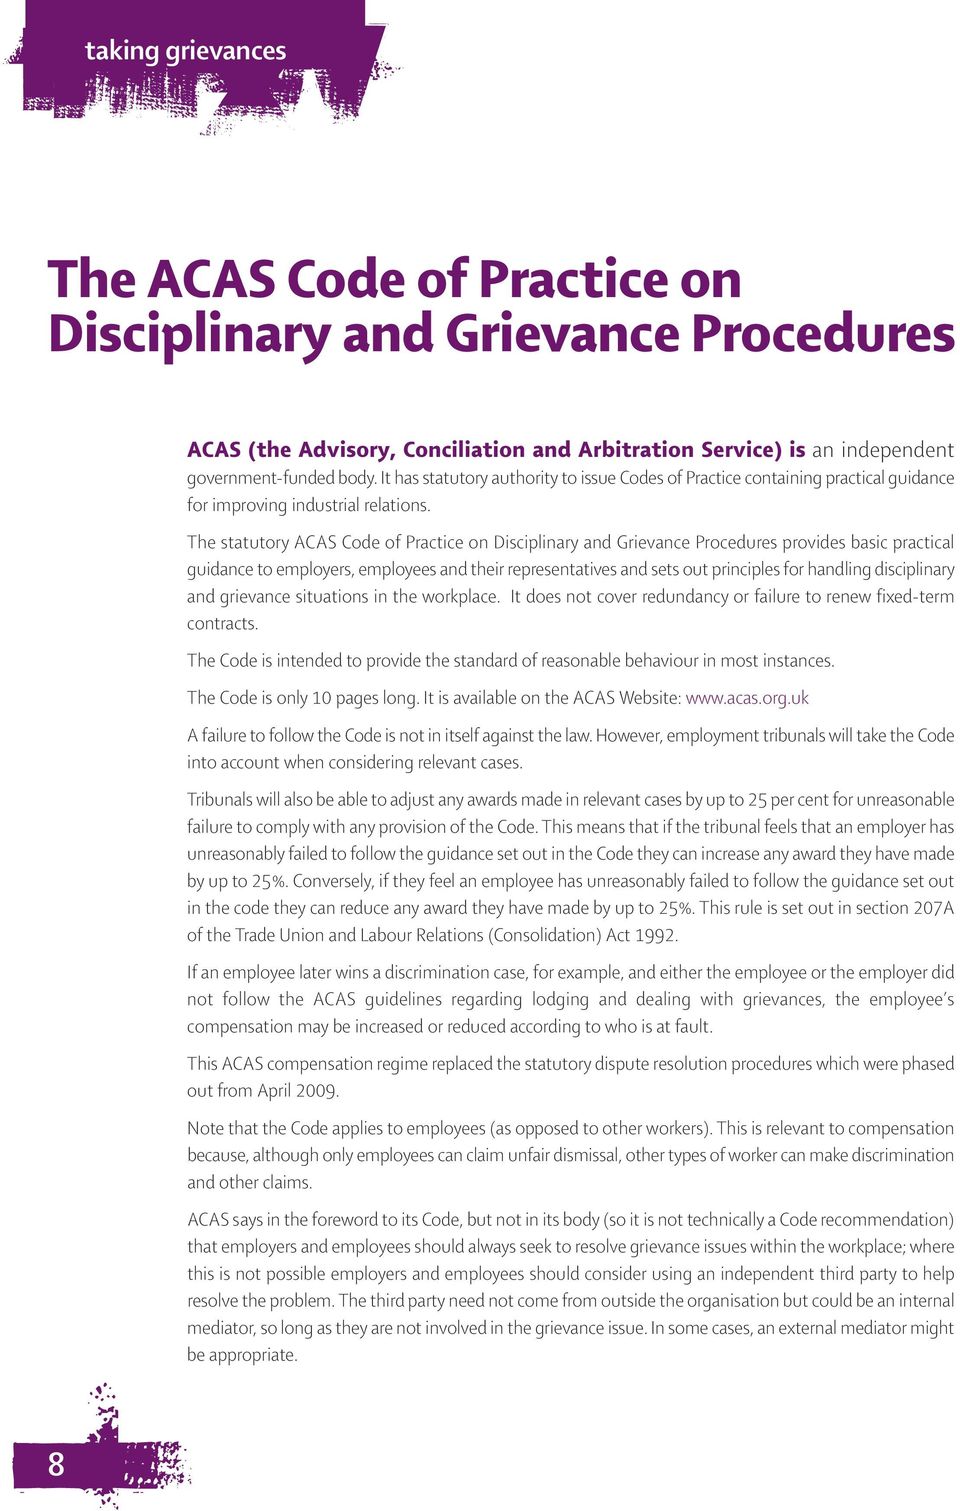 The statutory ACAS Code of Practice on Discipinary and Grievance Procedures provides basic practica guidance to empoyers, empoyees and their representatives and sets out principes for handing